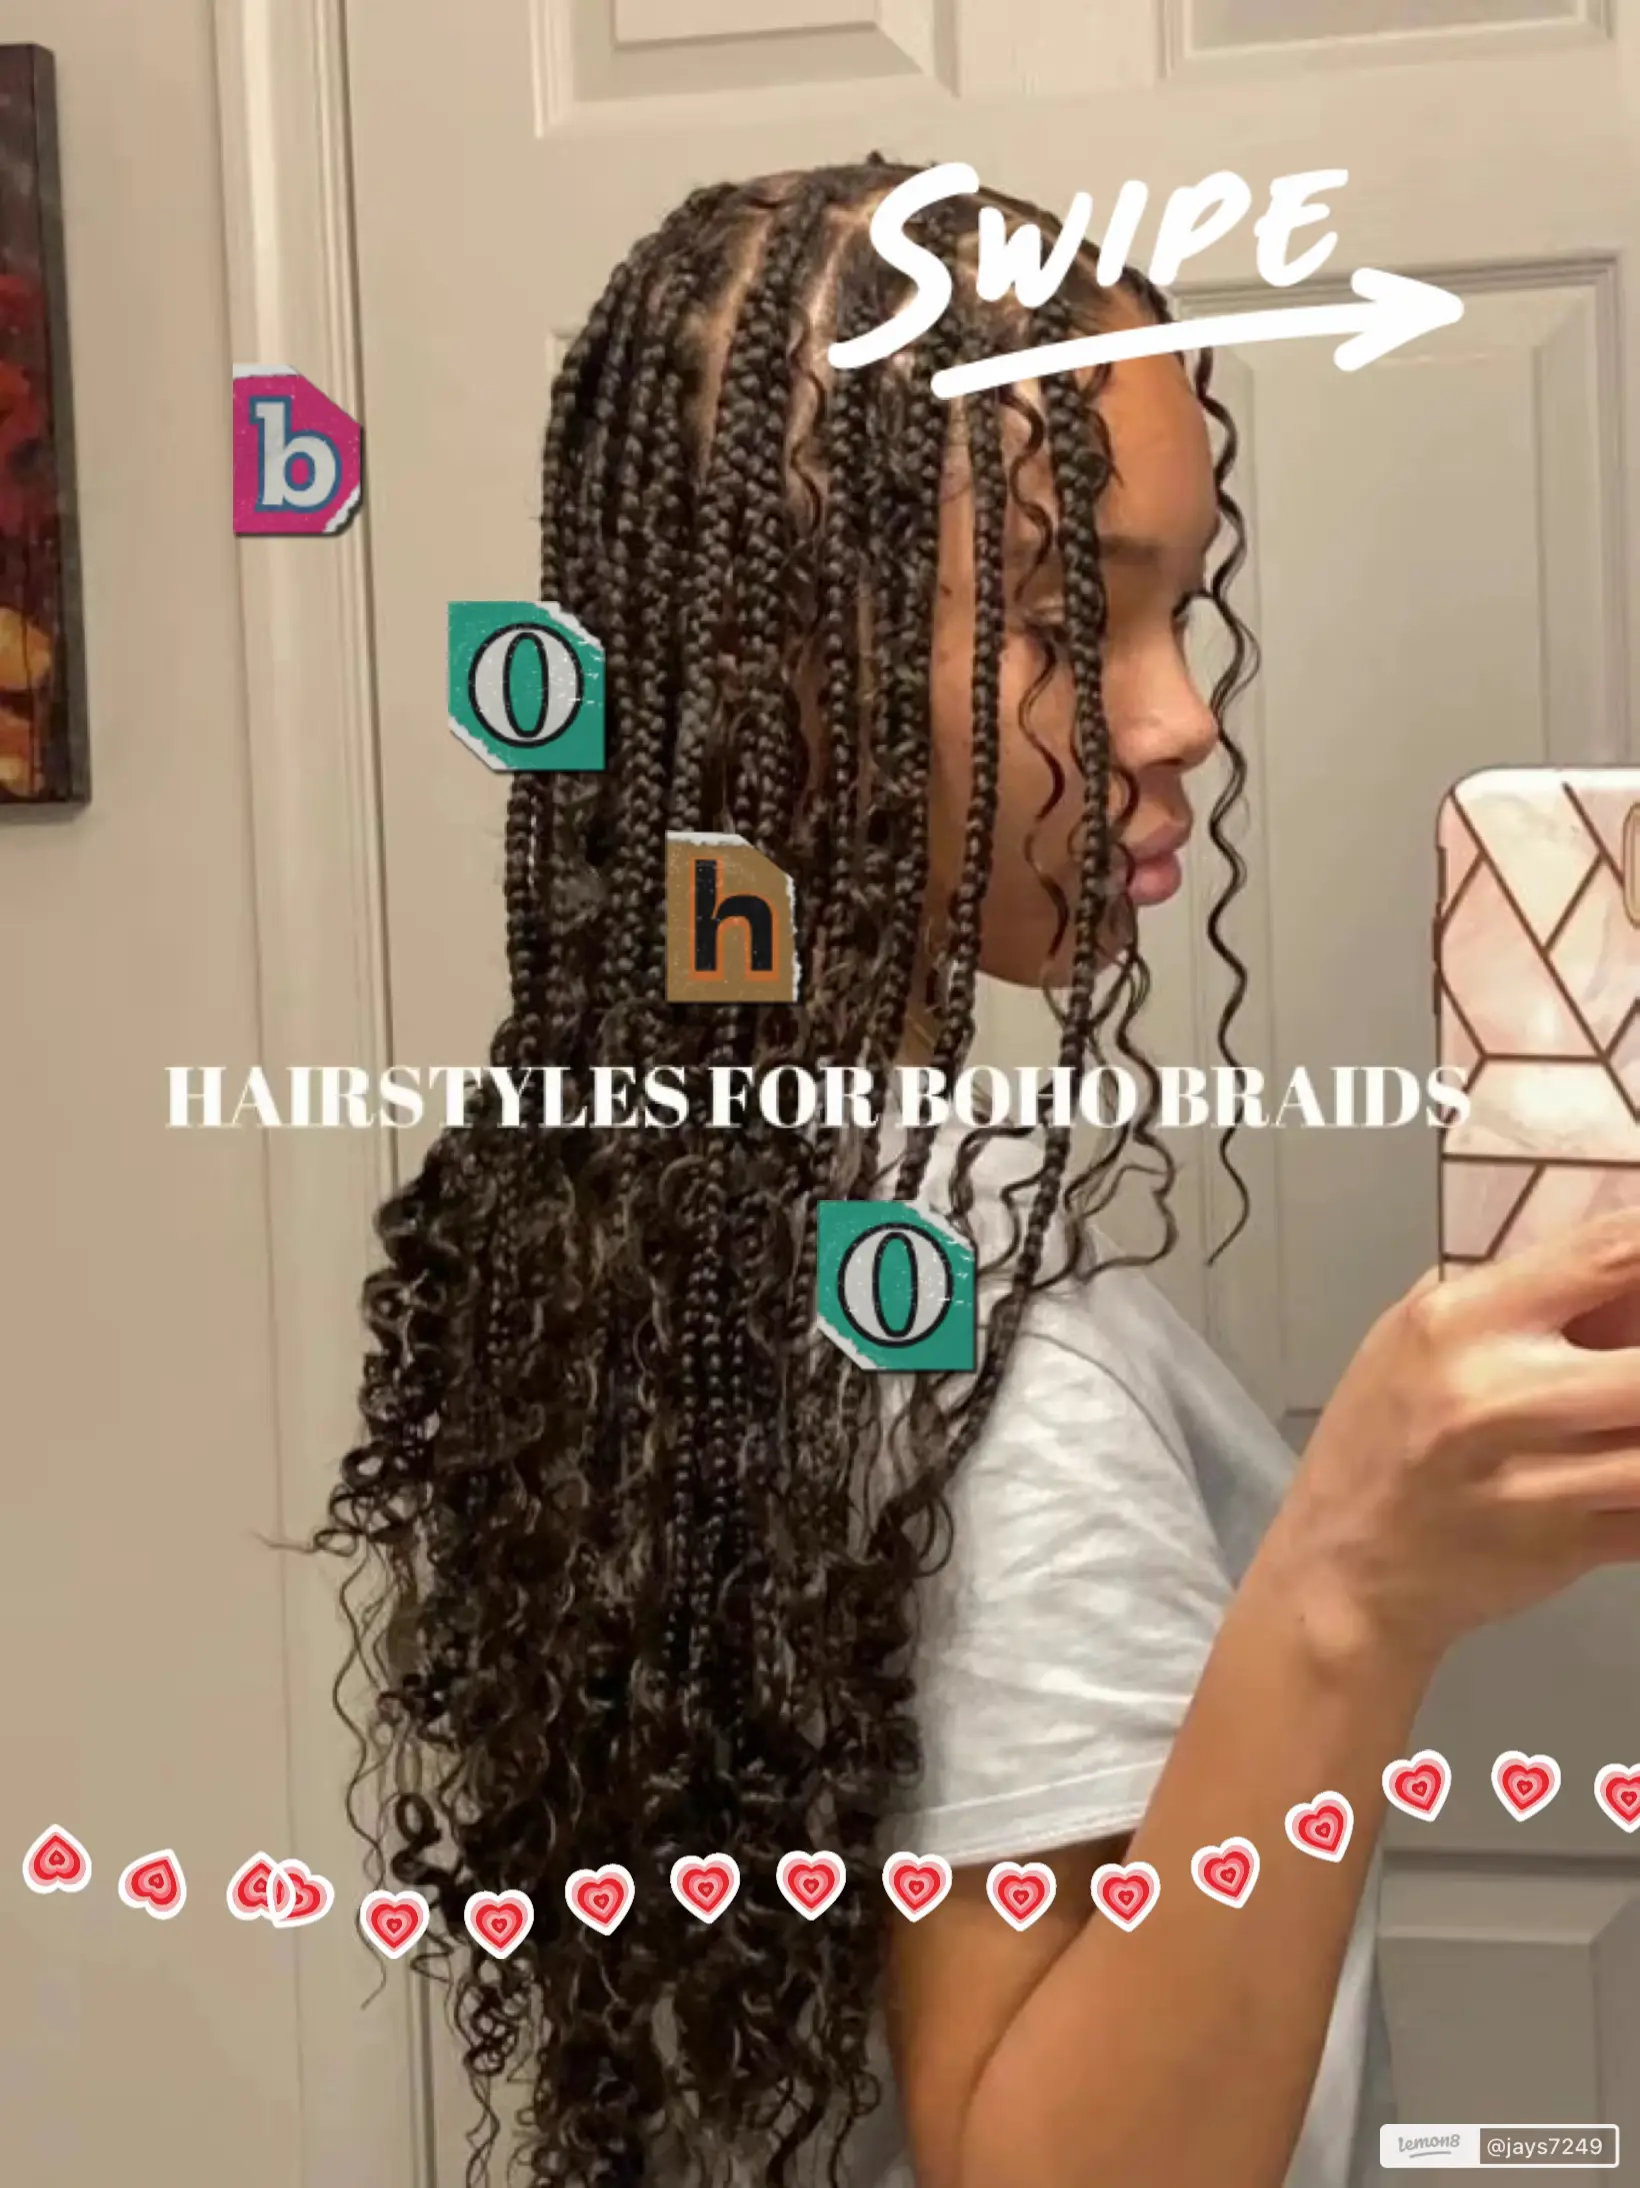 7 hours later 😍😍😍 Style: Medium Bohemian braids + human ends+ deep wave  ✧ May Appointments are available ❤️‍🔥 �